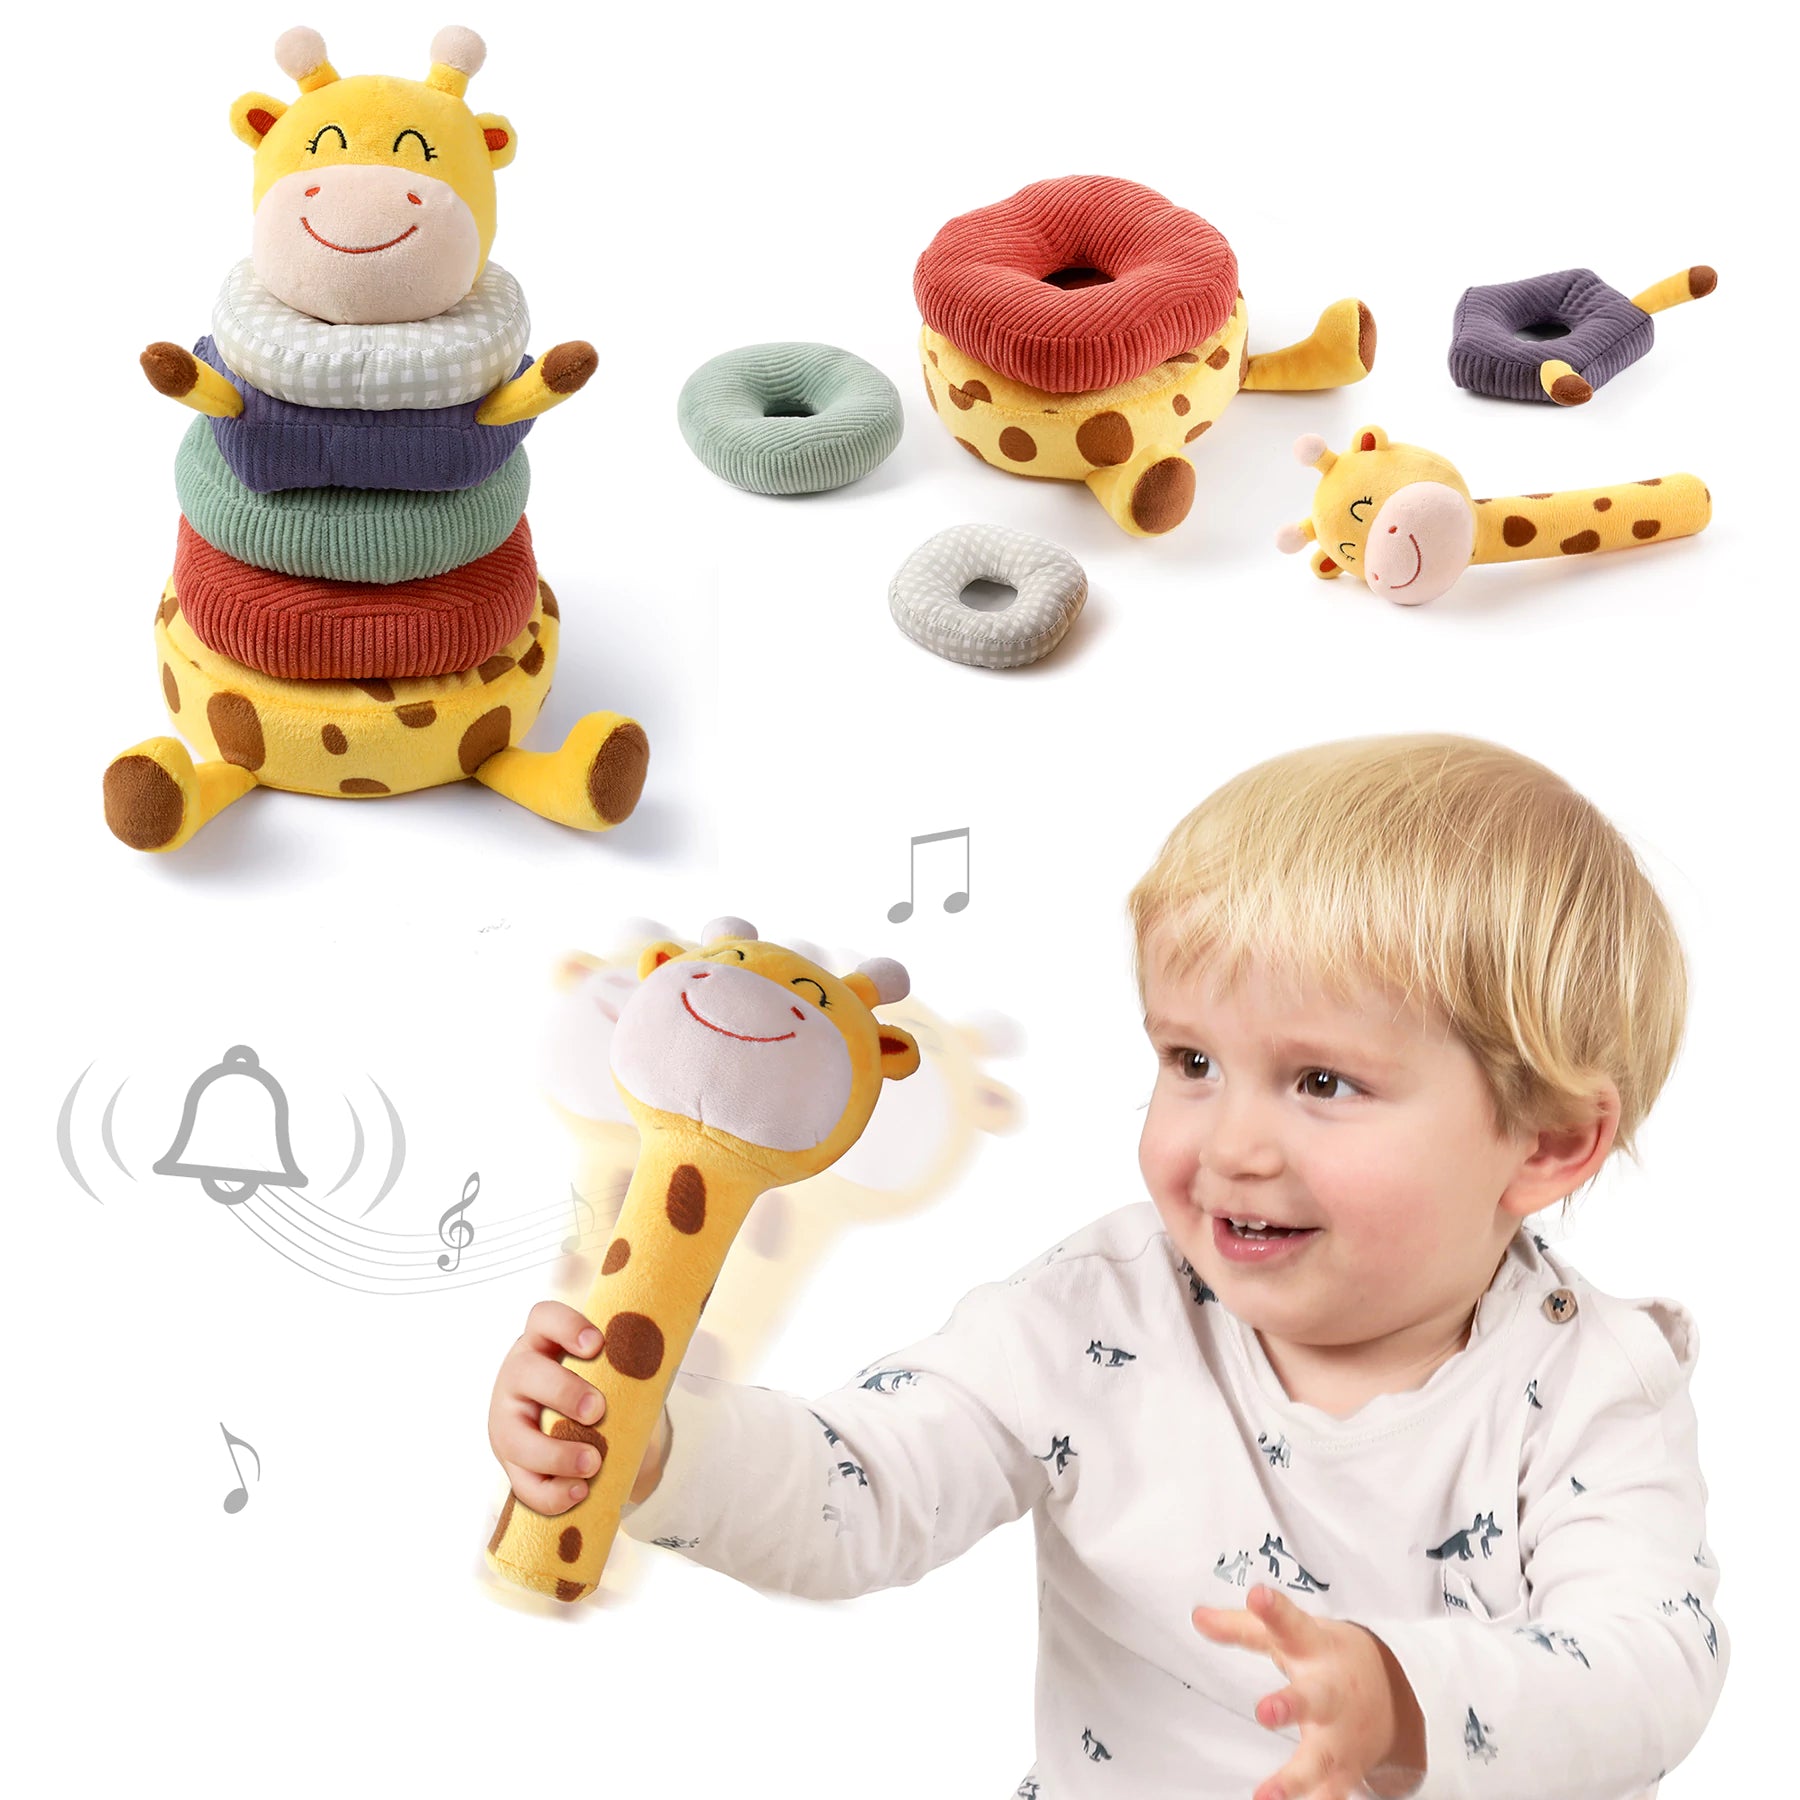 Plush stacking toy, montessori baby toy, soft giraffe stacking toys set, hand grip rattle for 0 Month babies toddler